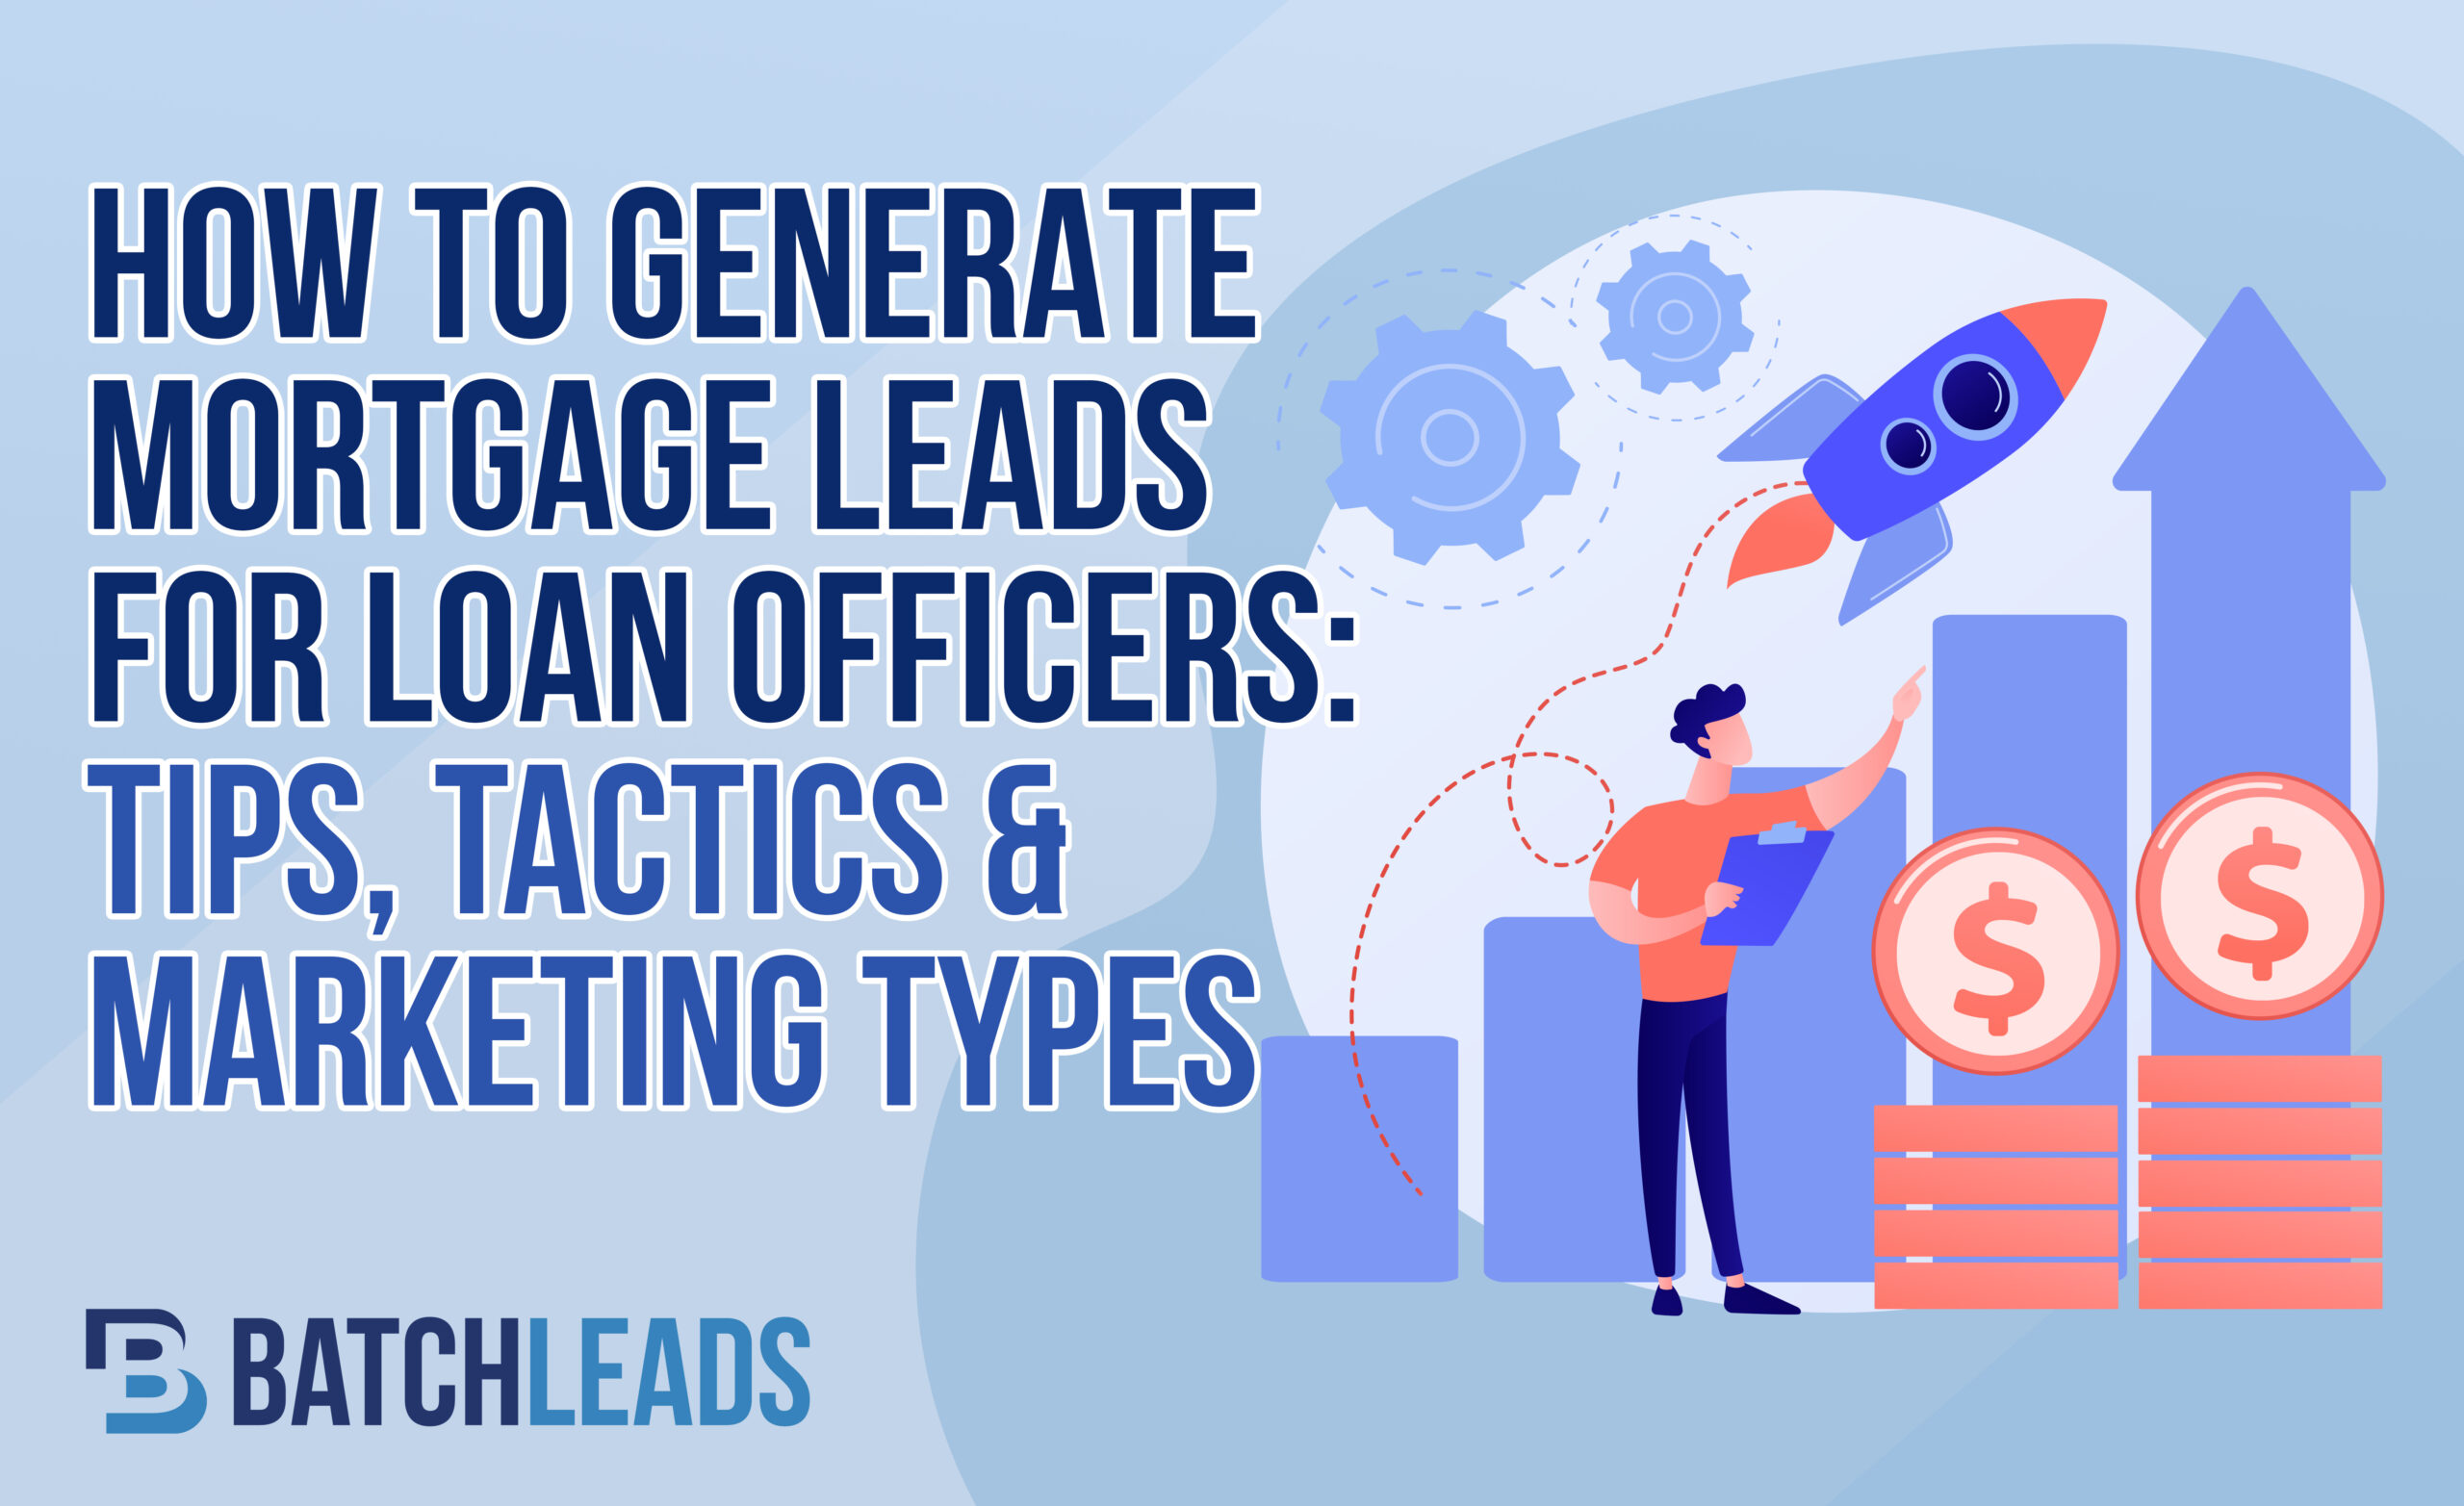 How To Generate Mortgage Leads For Loan Officers